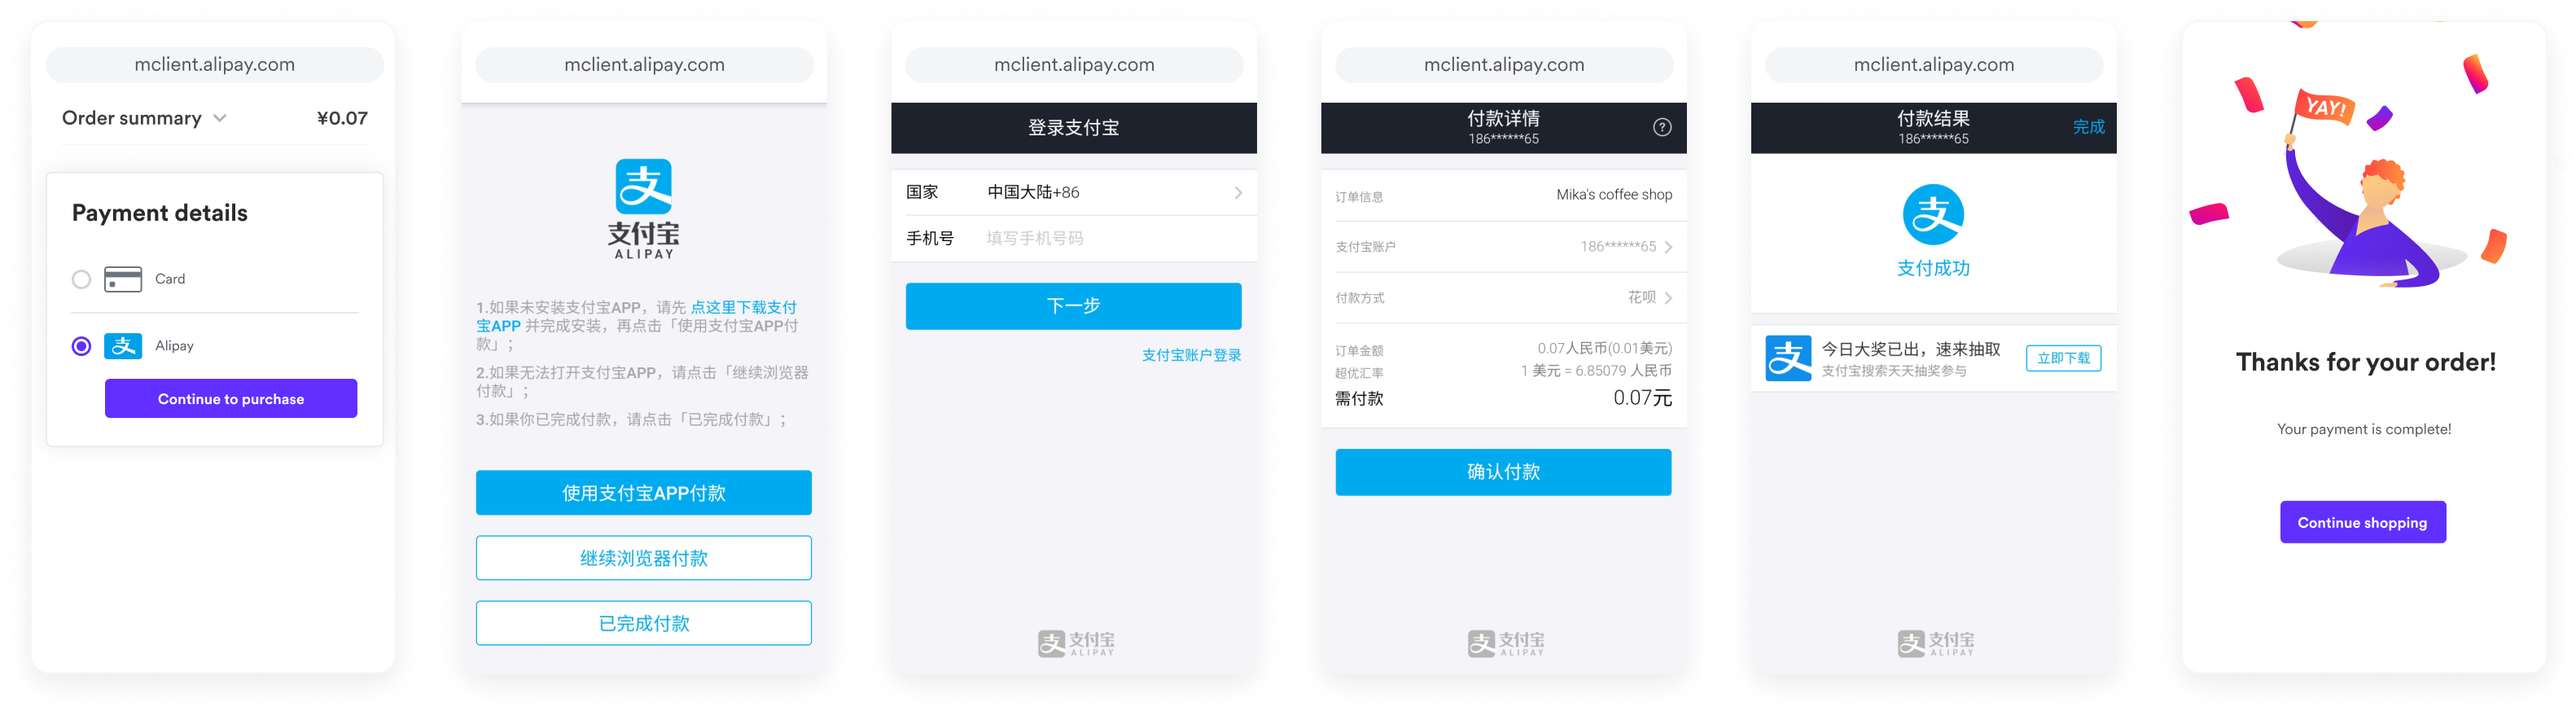 Alipay - Mobile Website Browser